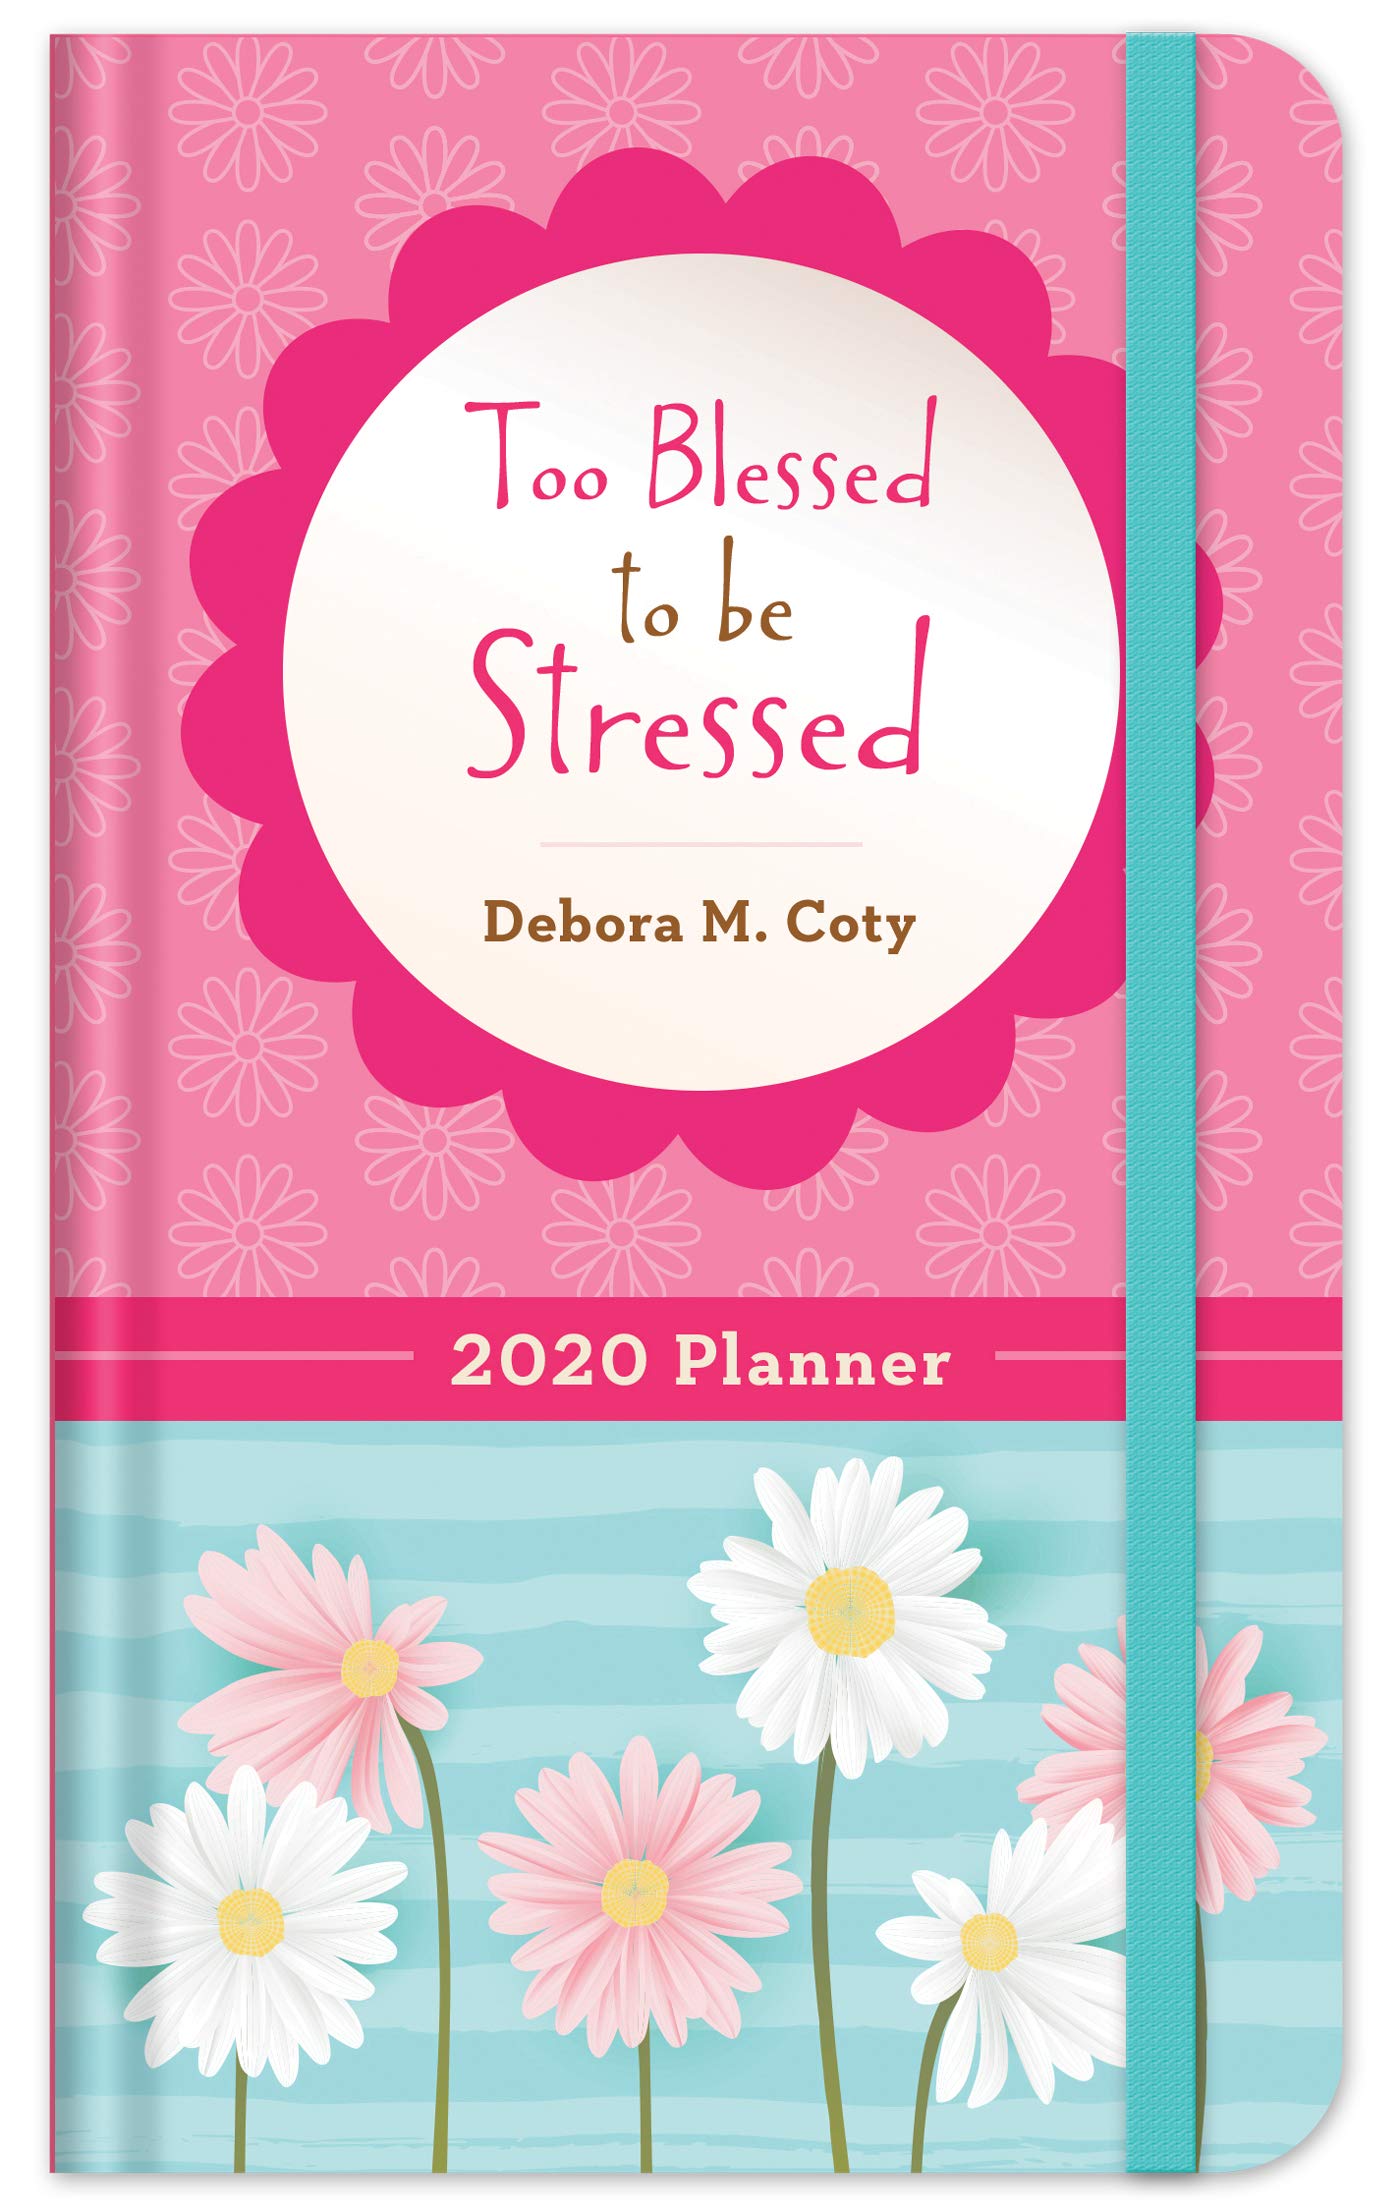 2020 Planner Too Blessed to be Stressed